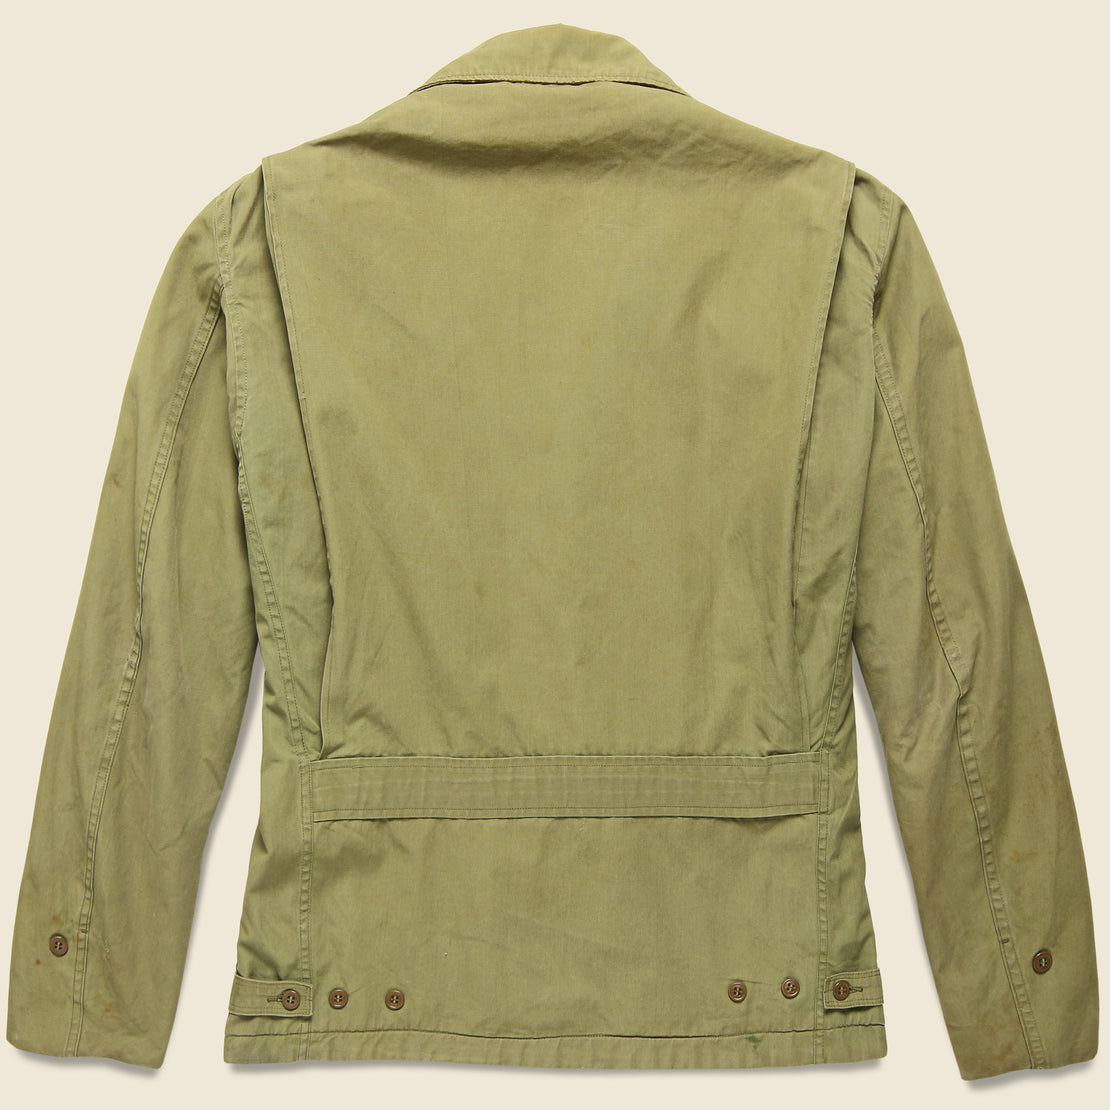 WWII Air Force Utility Jacket - Military Green - Vintage - STAG Provisions - One & Done - Apparel